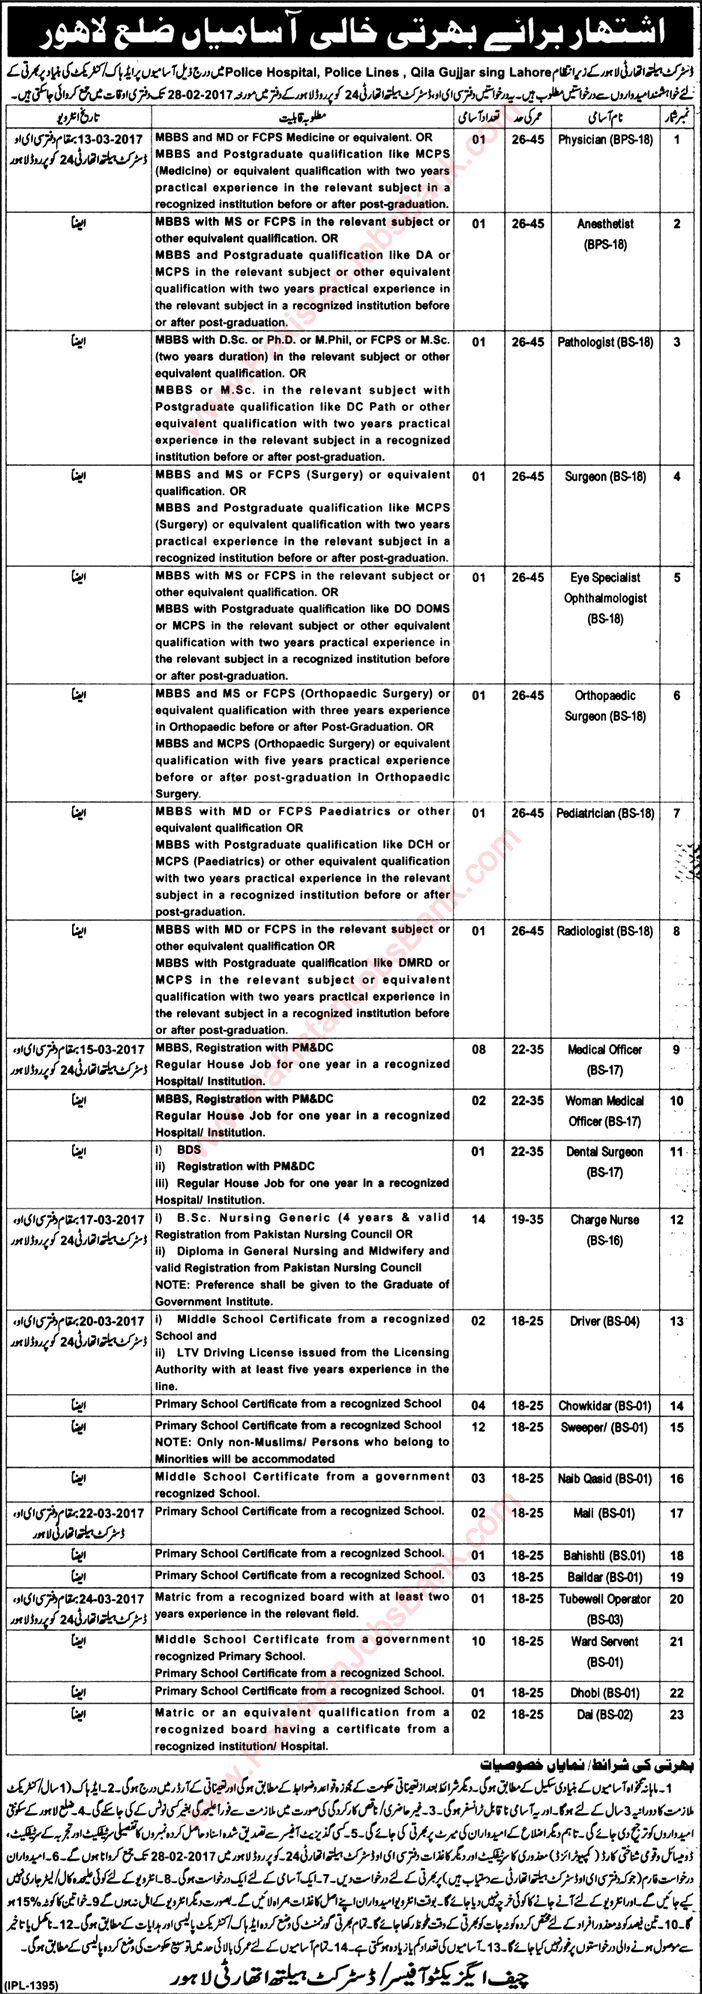 Health Department Lahore Jobs February 2017 Medical Officers, Specialist Doctors, Nurses & Others Latest